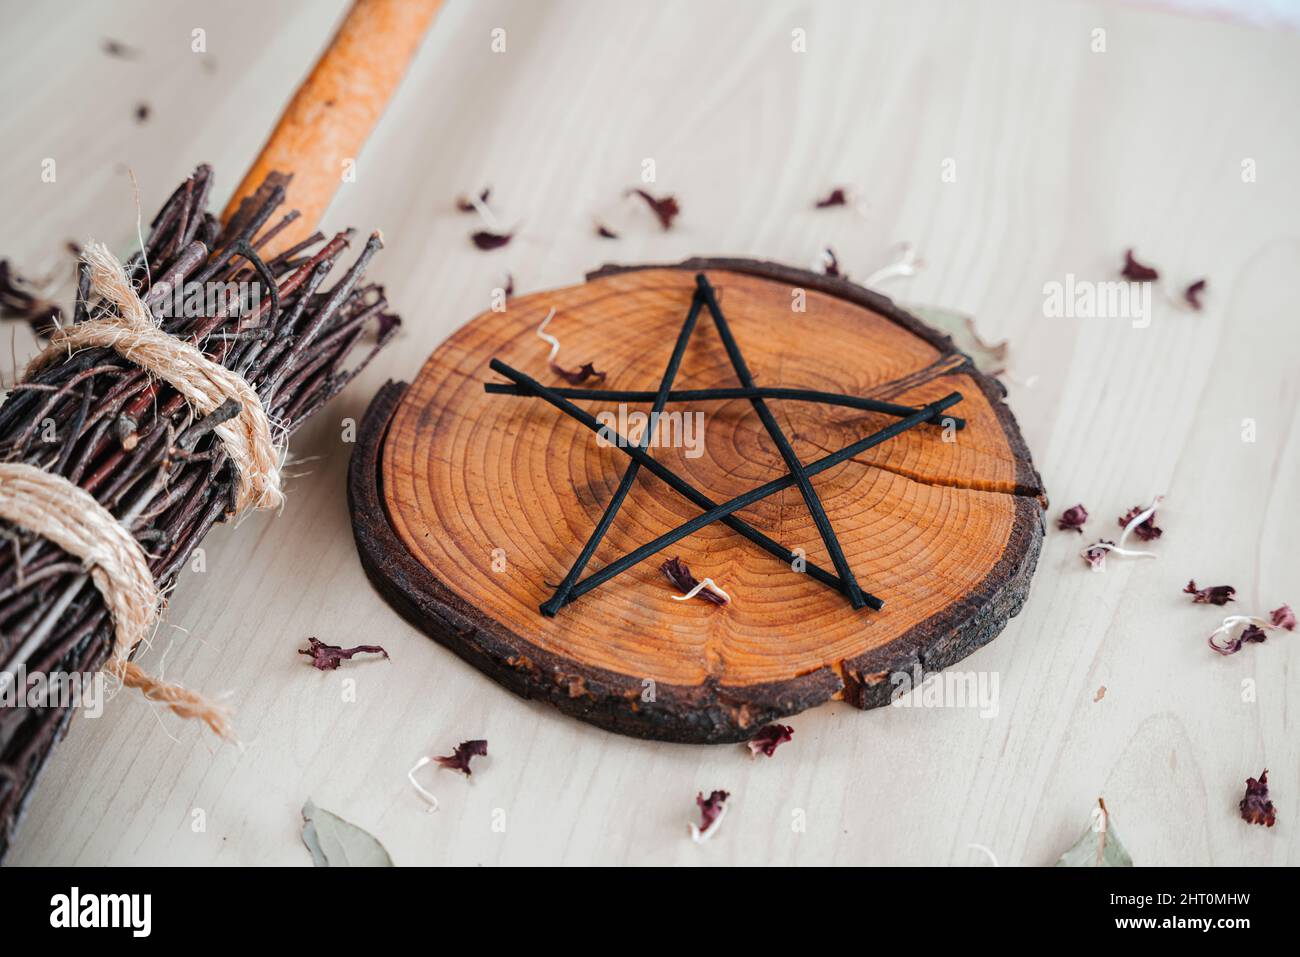 Hand made DIY besom broom and black pentagram on a white wooden table. Witchy closeup of ritual witchcraft items Stock Photo